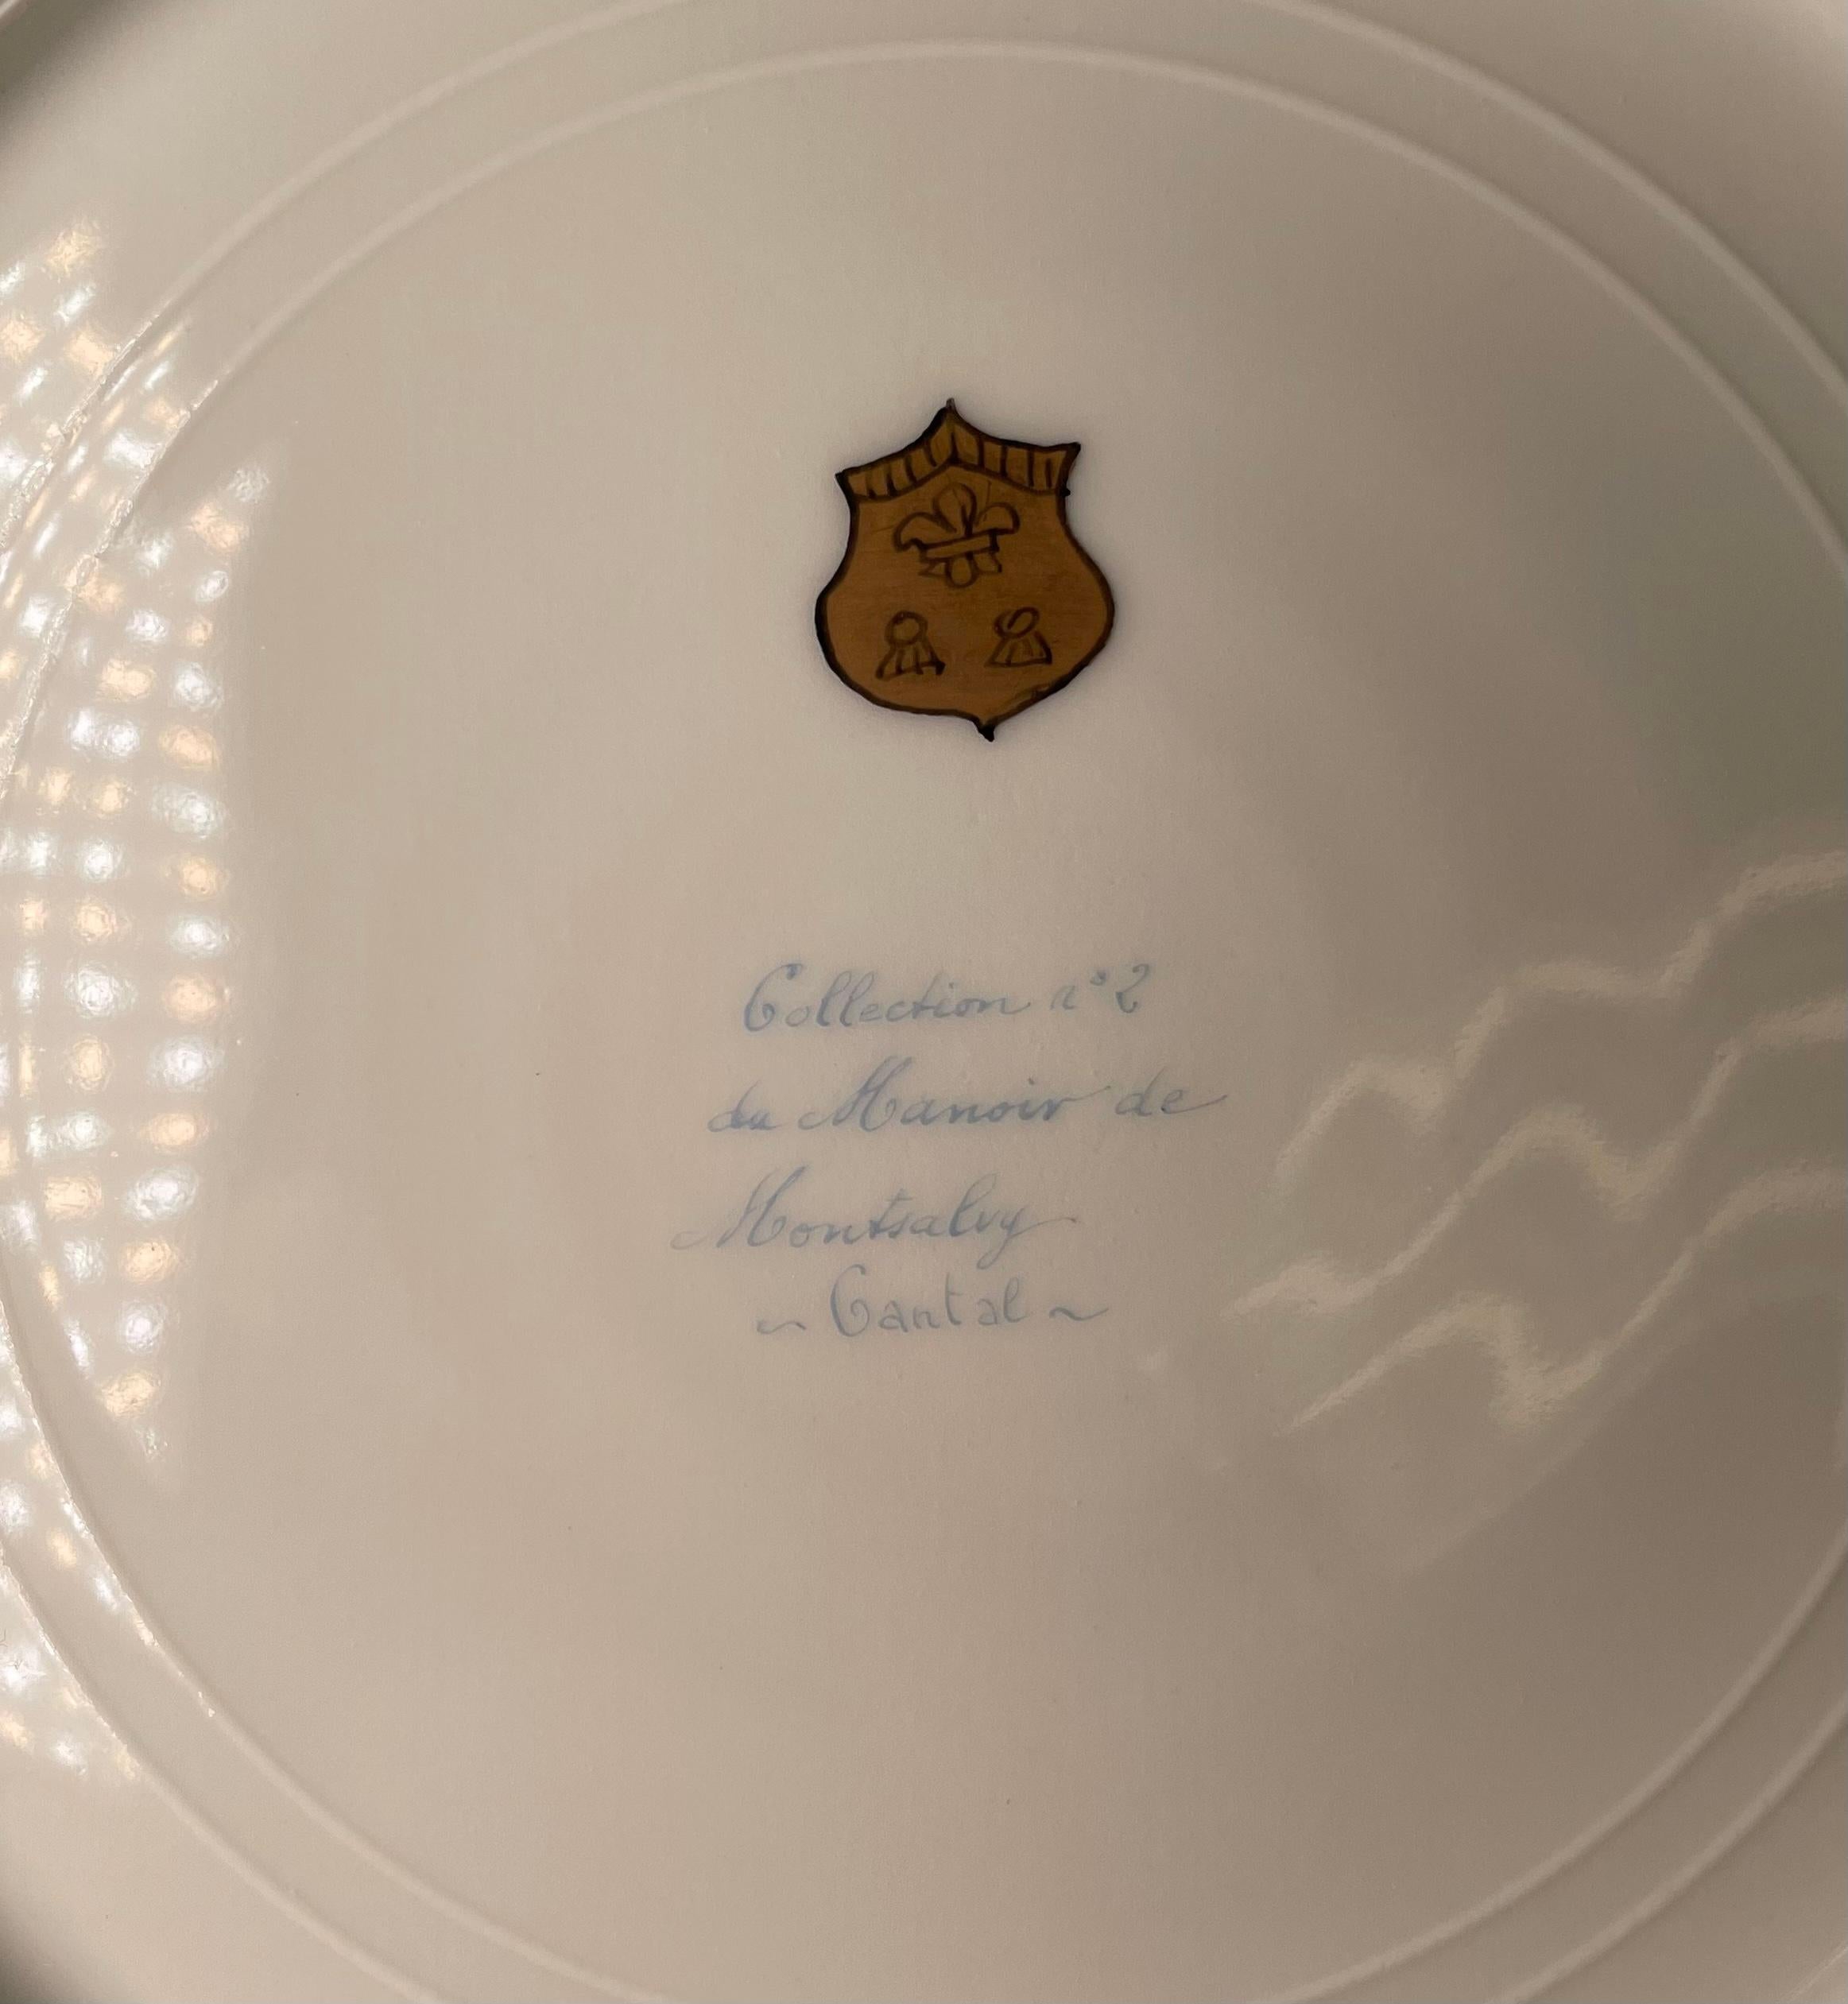 Set of Six Porcelain Plates from the Collection of the Manoir of Montsalvy For Sale 4